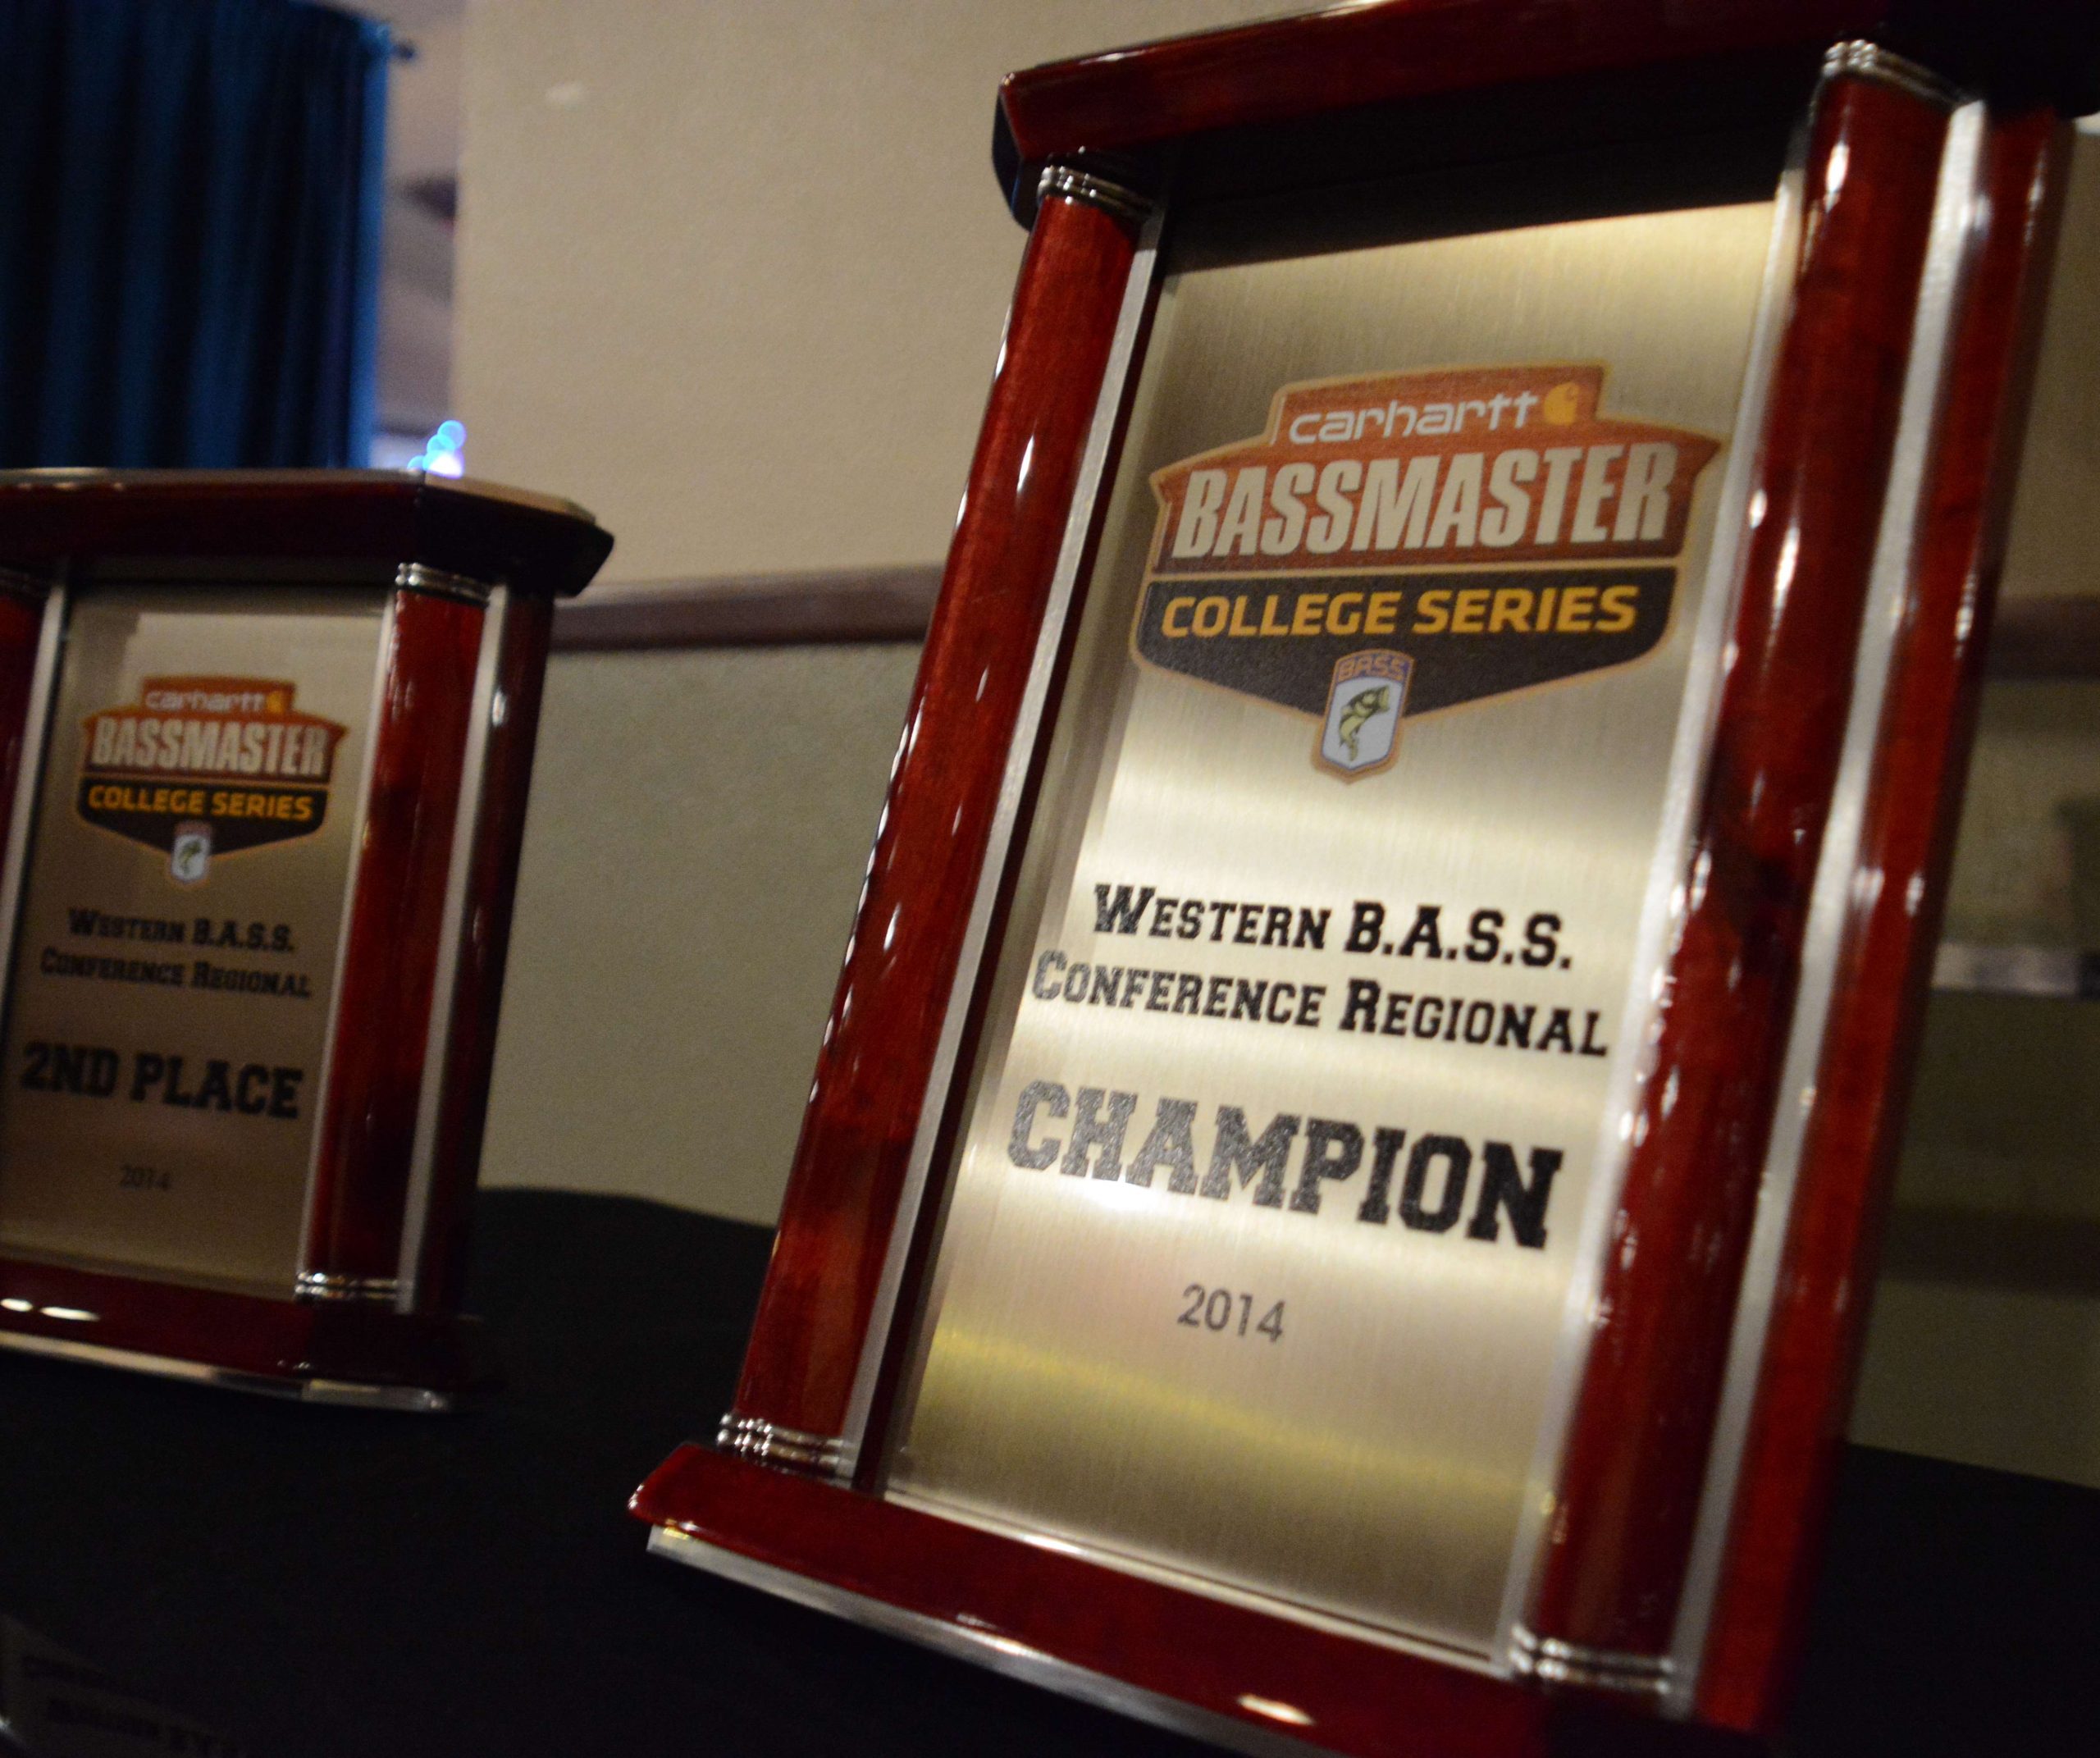 The contenders are vying for this trophy, and the top competitors on the leaderboard also qualify for the 2014 Carhartt Bassmaster National Championship in Georgia.